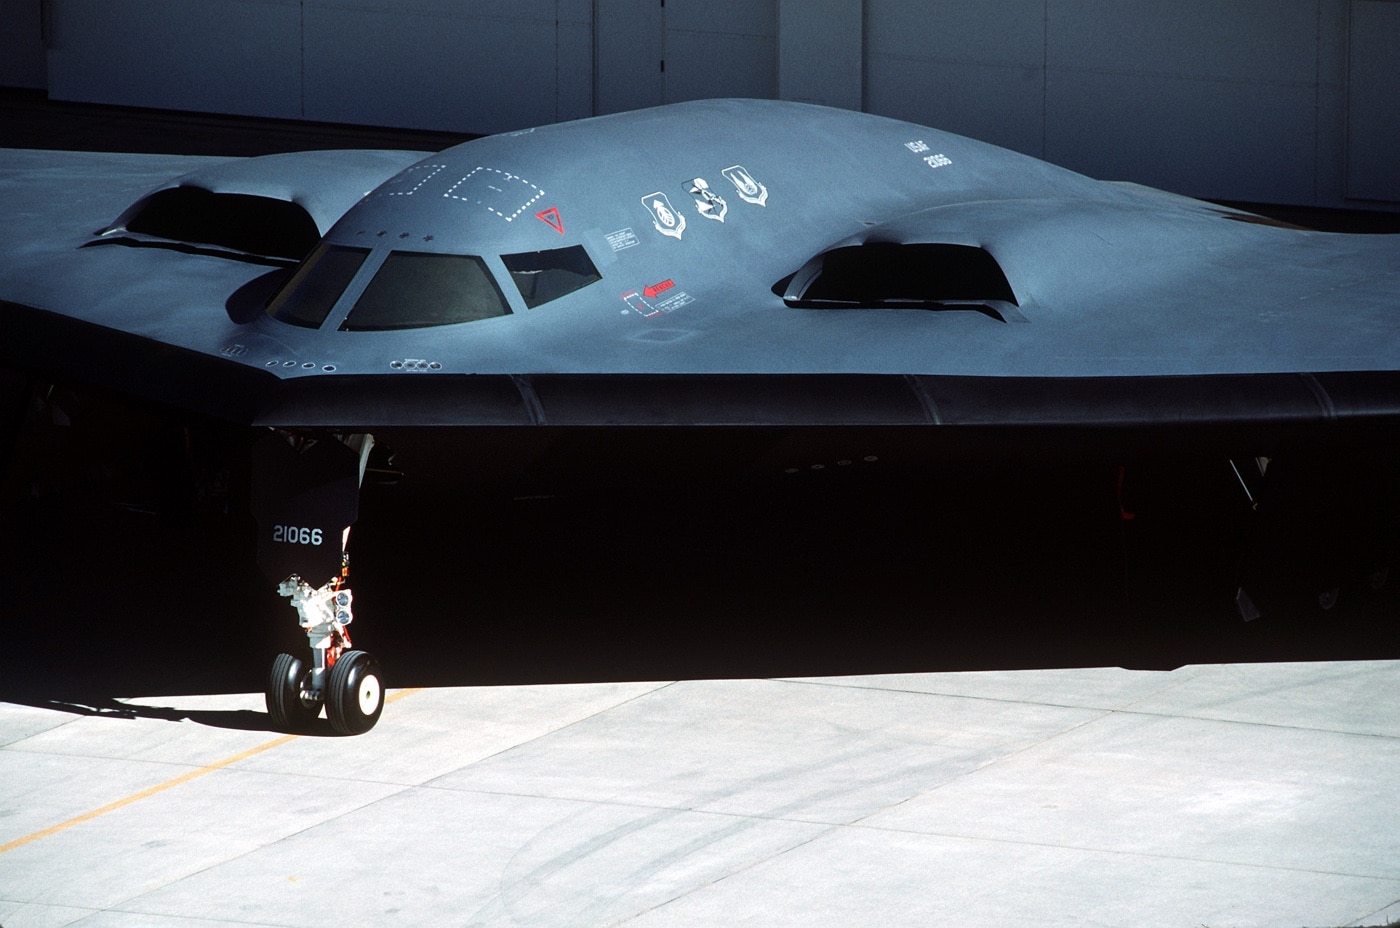 b-2 introduced to the world in 1988